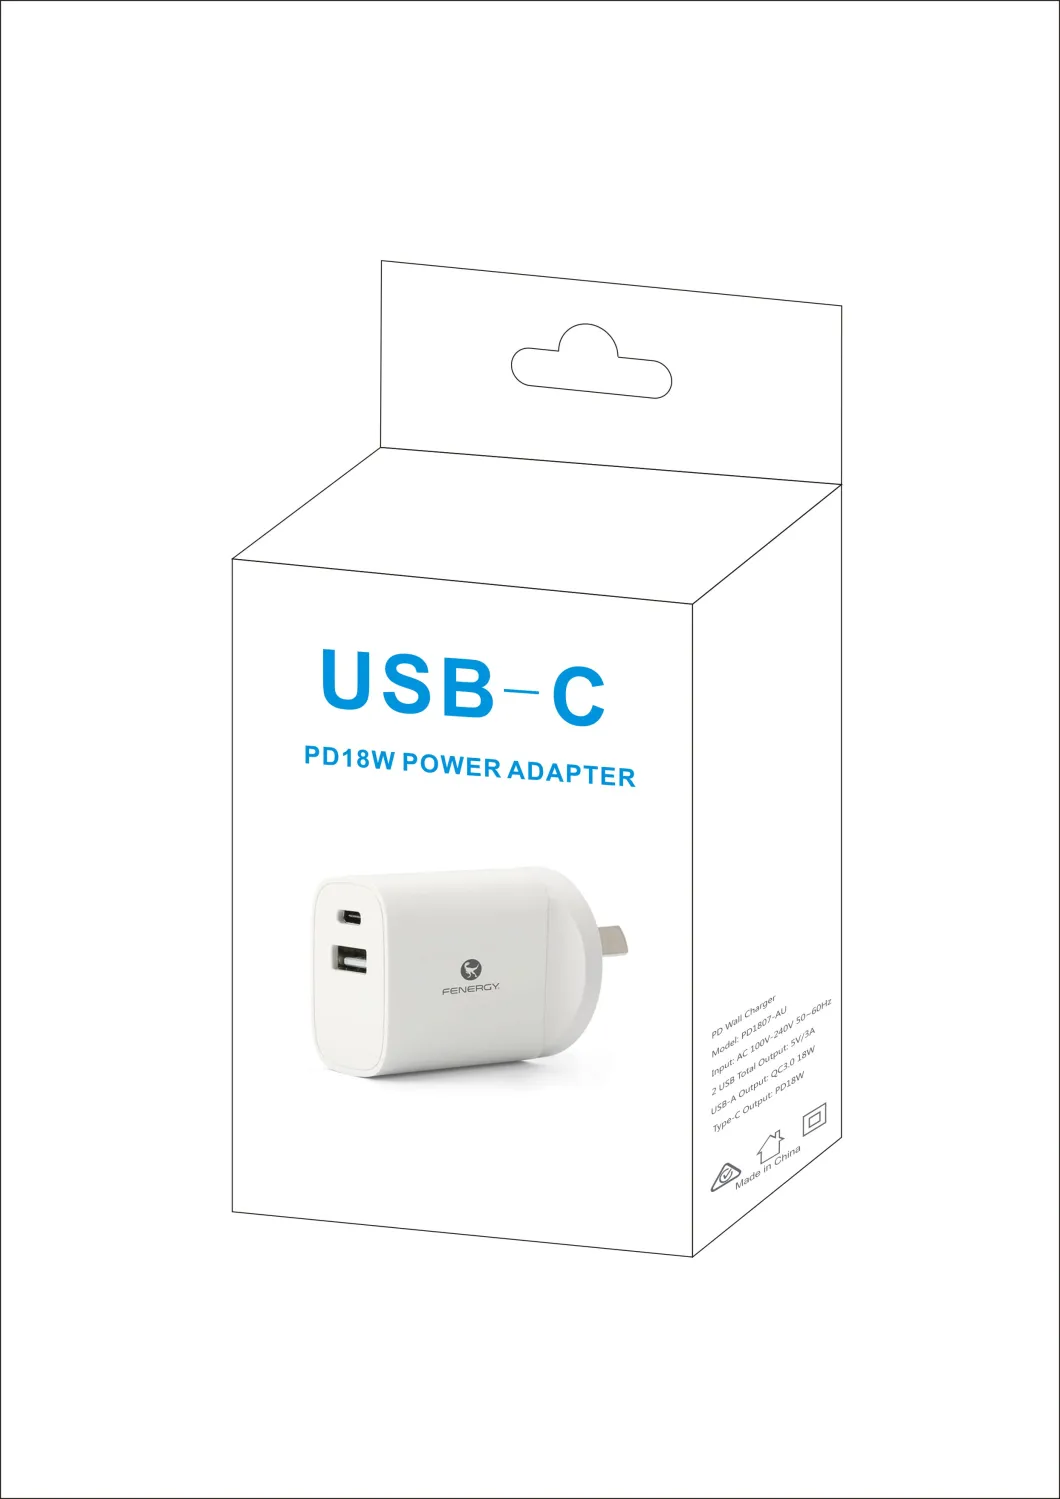 USB Charger Smart Fast Charger Multi Charger Station for iPhone